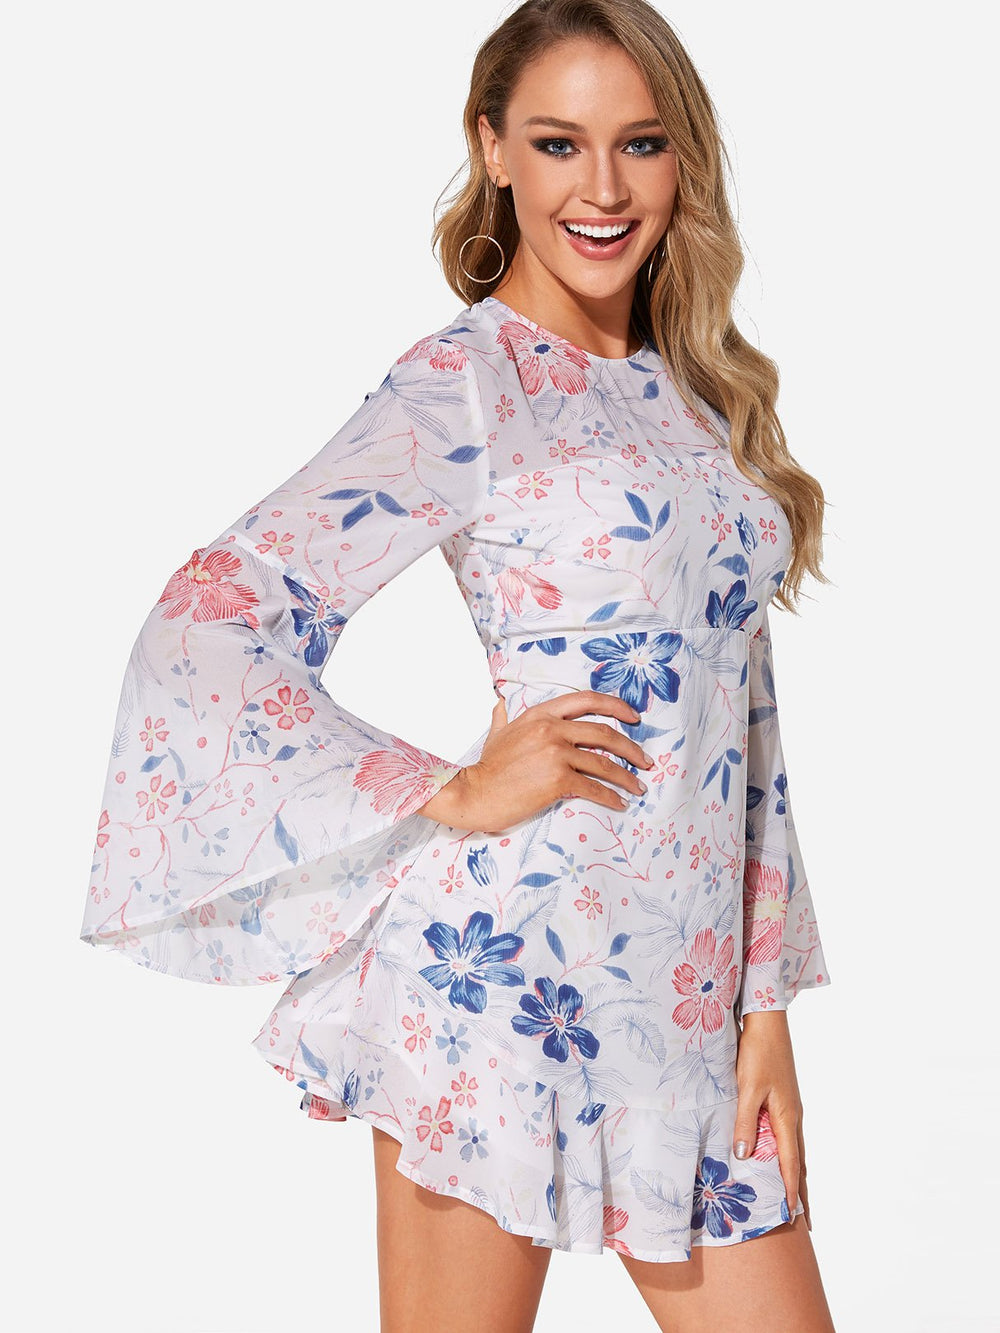 White Round Neck Long Sleeve Floral Print Backless Mini Dress